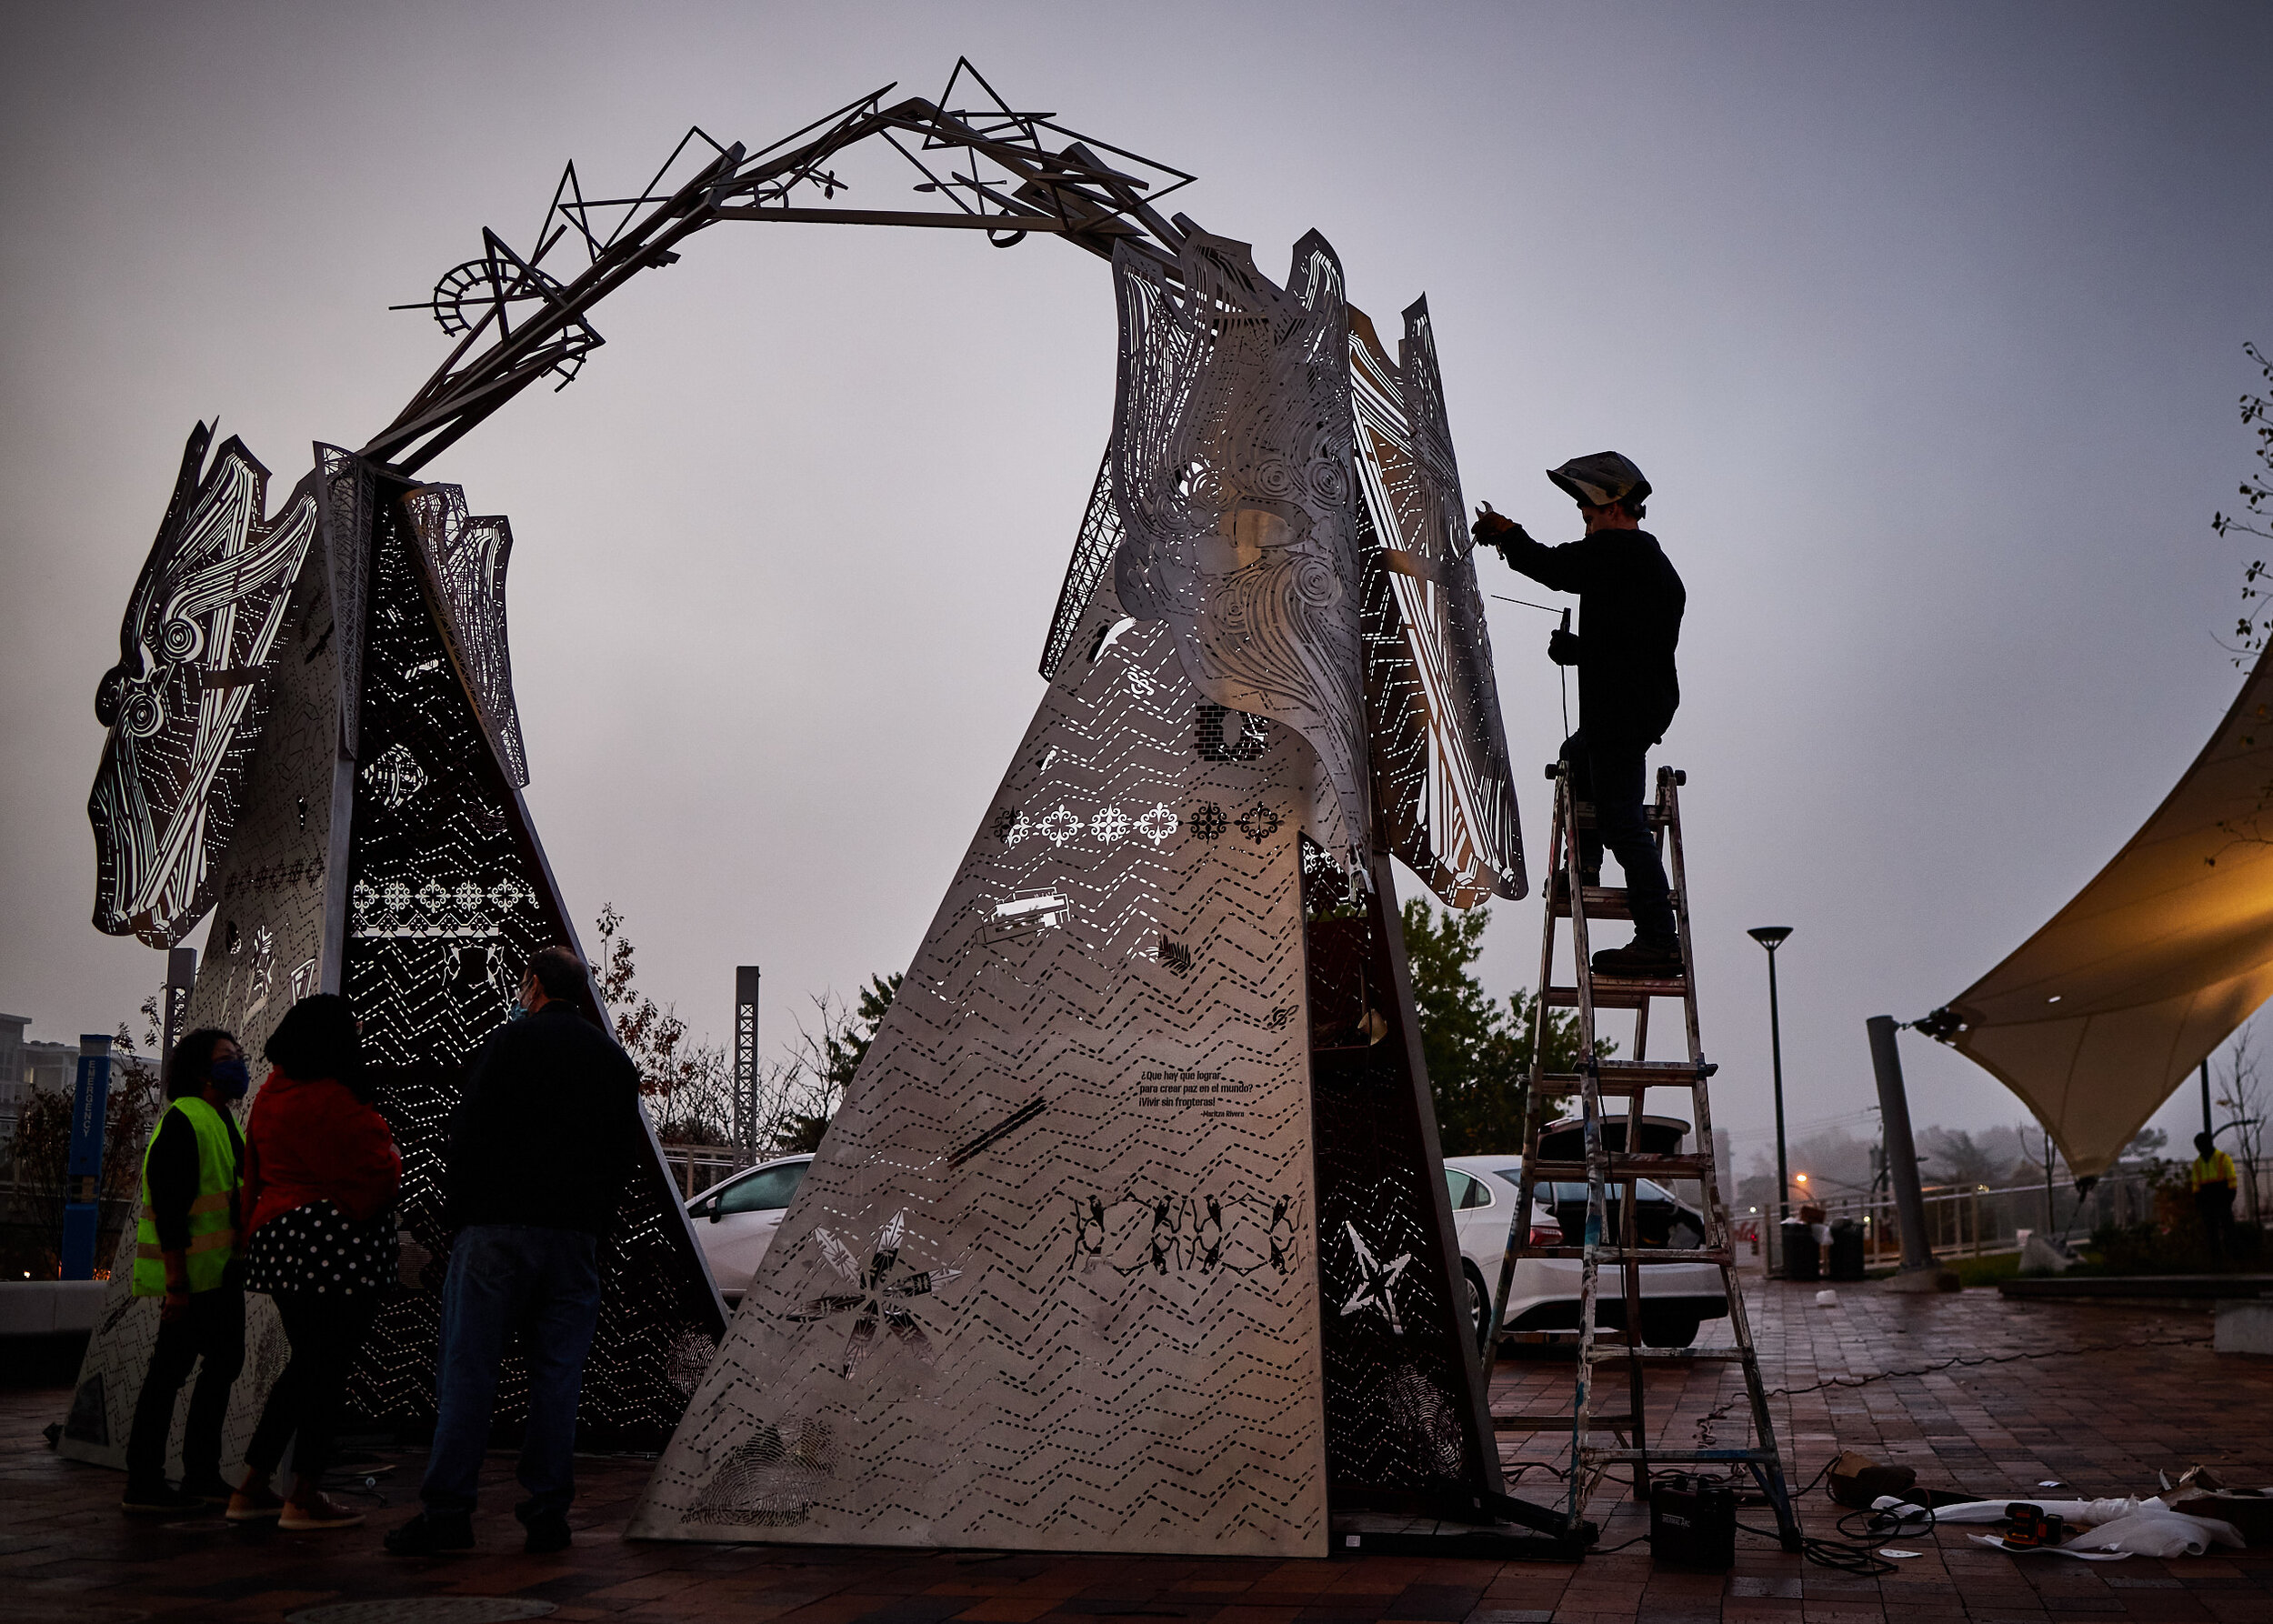  Installation of "Meet Me at the Triangles" public art piece on October 22, 2020. [Image copyright Matthew Rakola. Use only with permission.] 